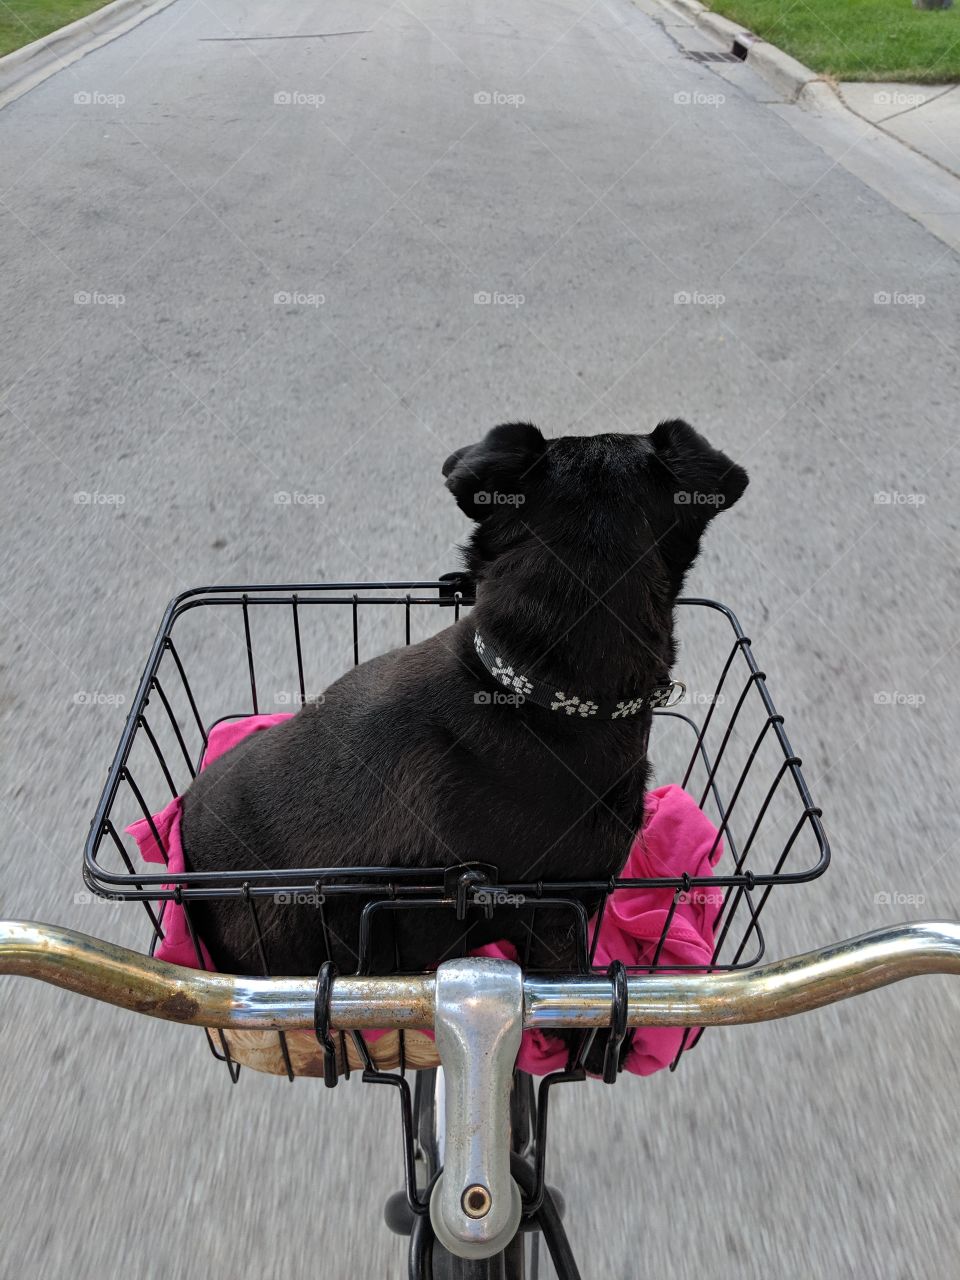 Out for a ride with my doggy girlfriend.